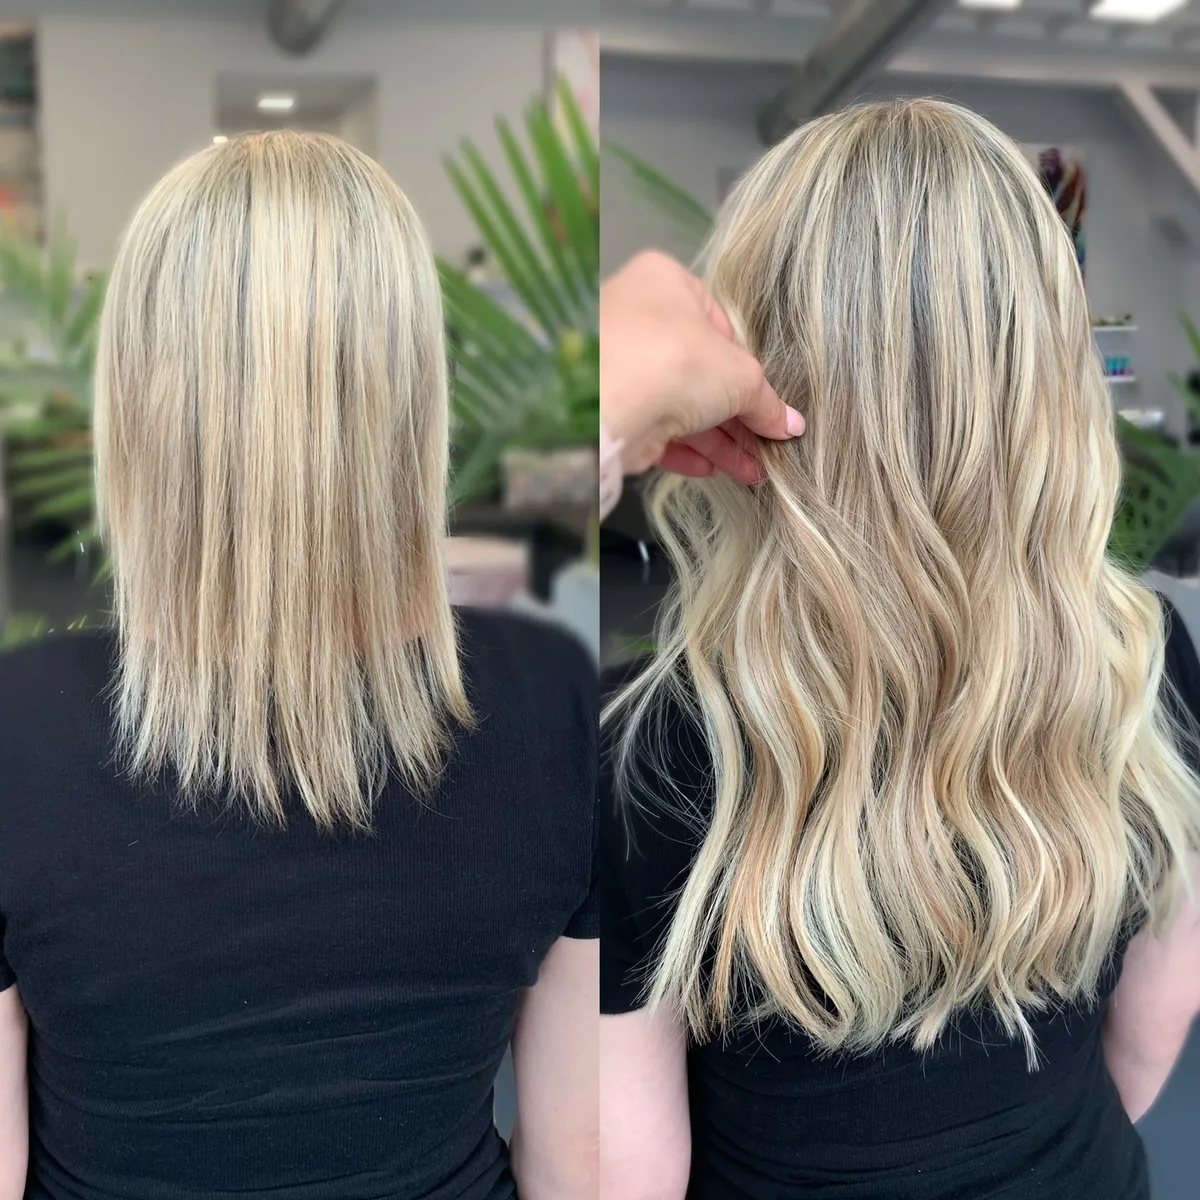 Before and after tape-in extensions at Emma Justine Salon in Louisville, KY